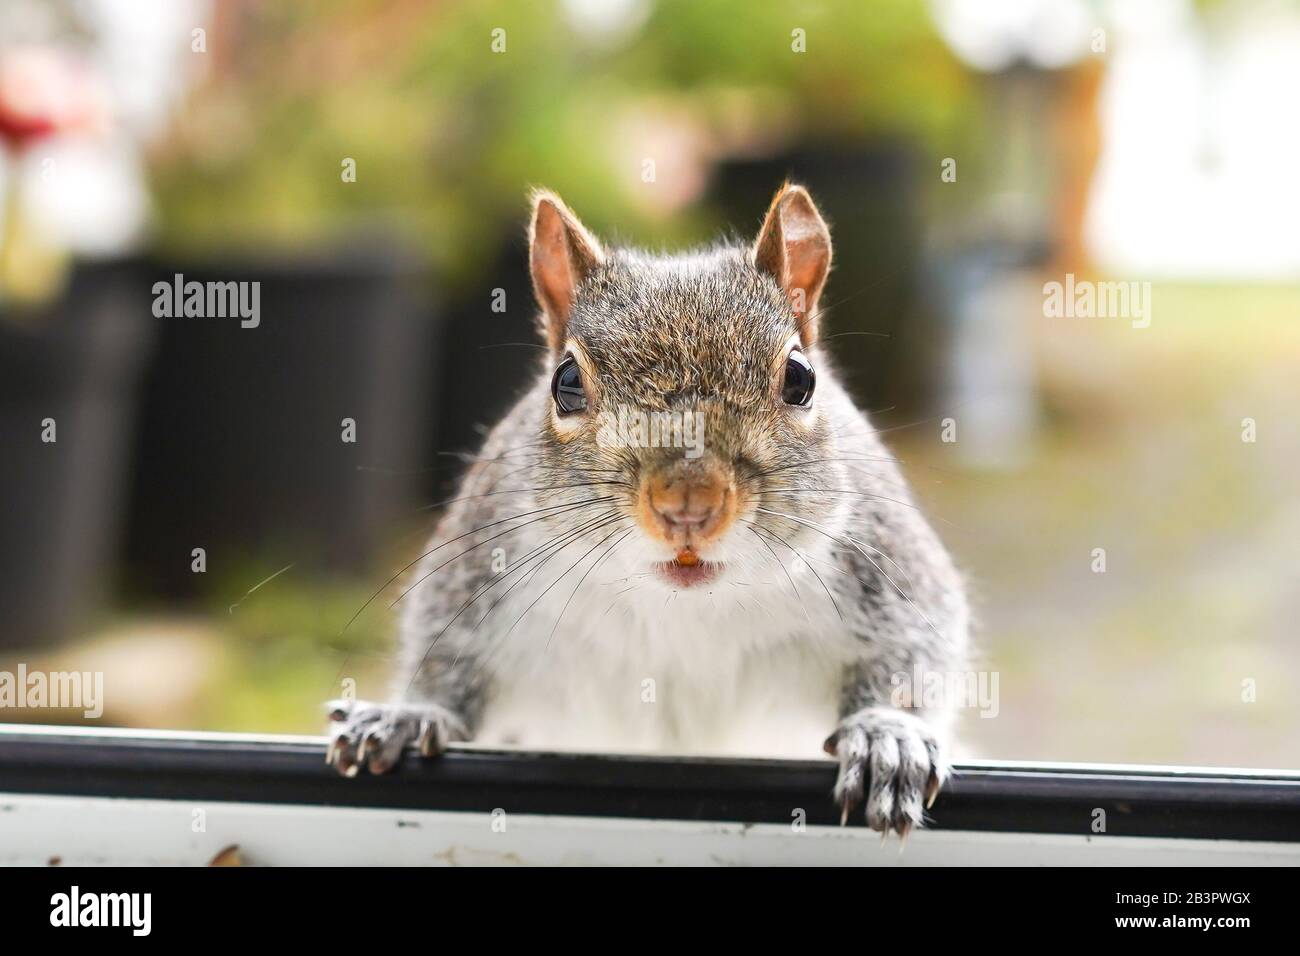 Close-up, amazing cheeky garden UK grey squirrel (Sciurus carolinensis) isolated by open back door sitting on step, paws on sill scrounging. Stock Photo